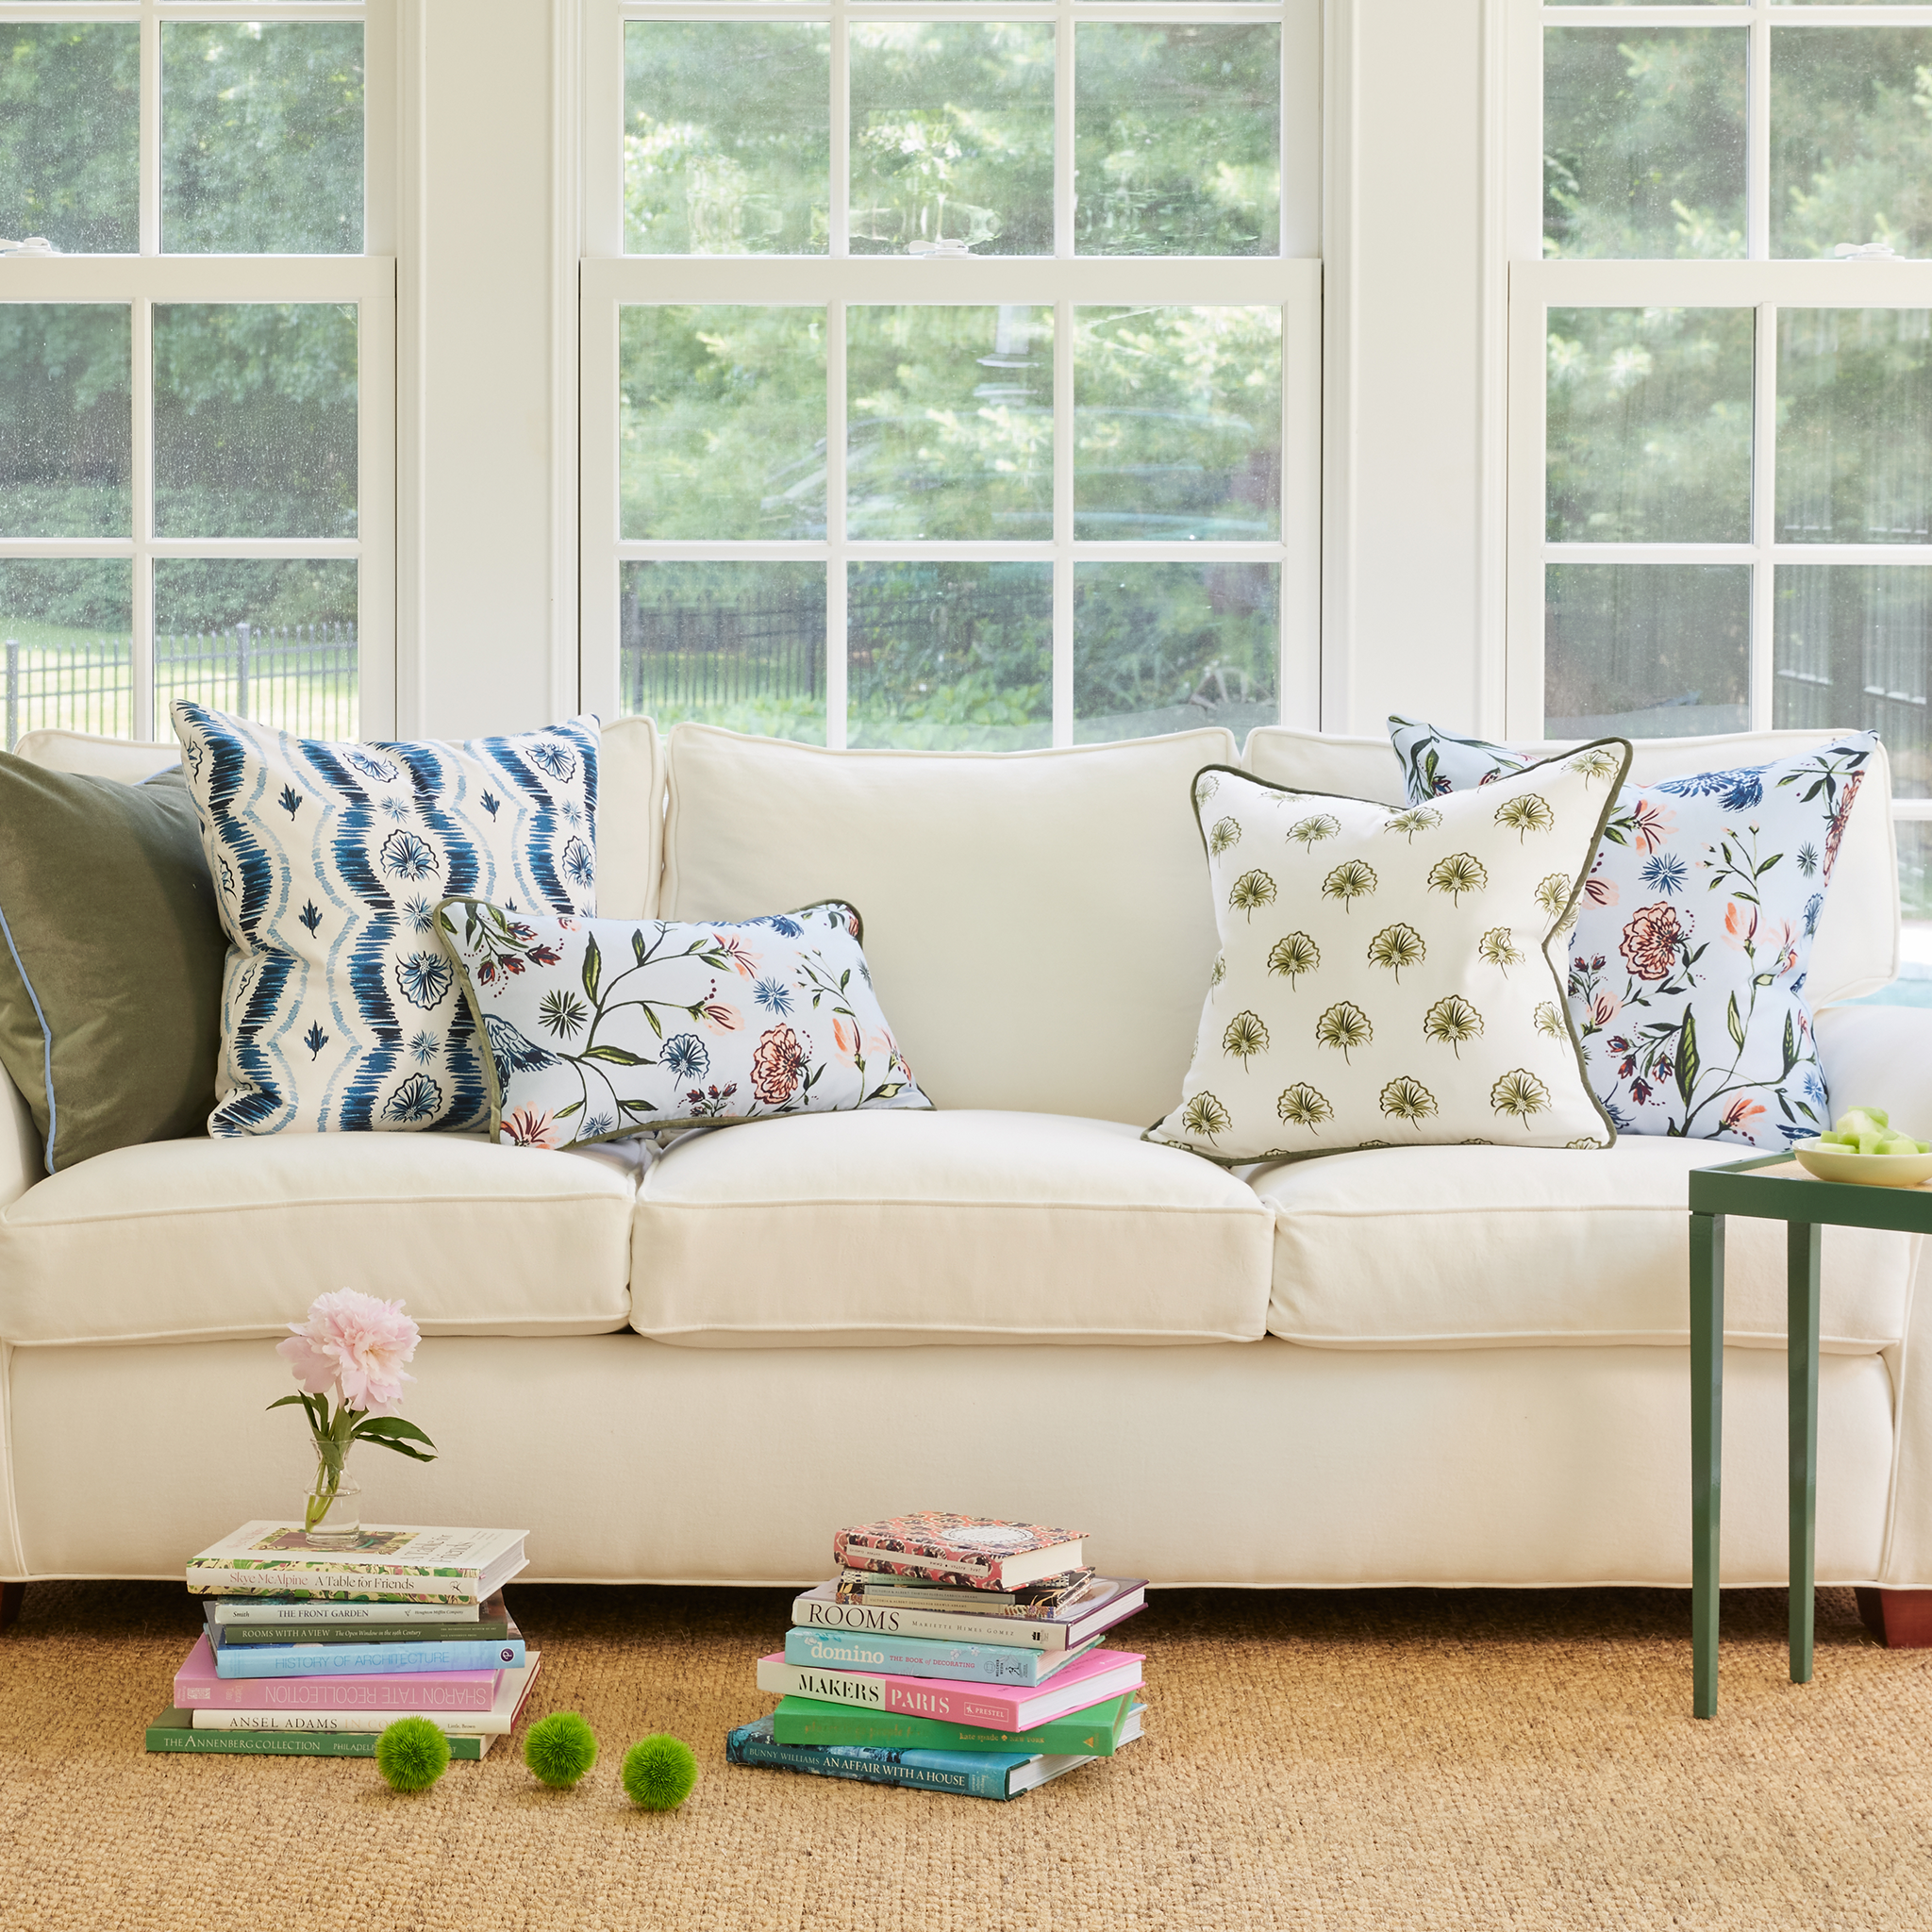 White couch on living room with fern green pillow, blue ikat pillow, daphne powder pillow, and green floral pillow by two stacks of books on the floor with one stack having a pink flower on top with white framed window in the back